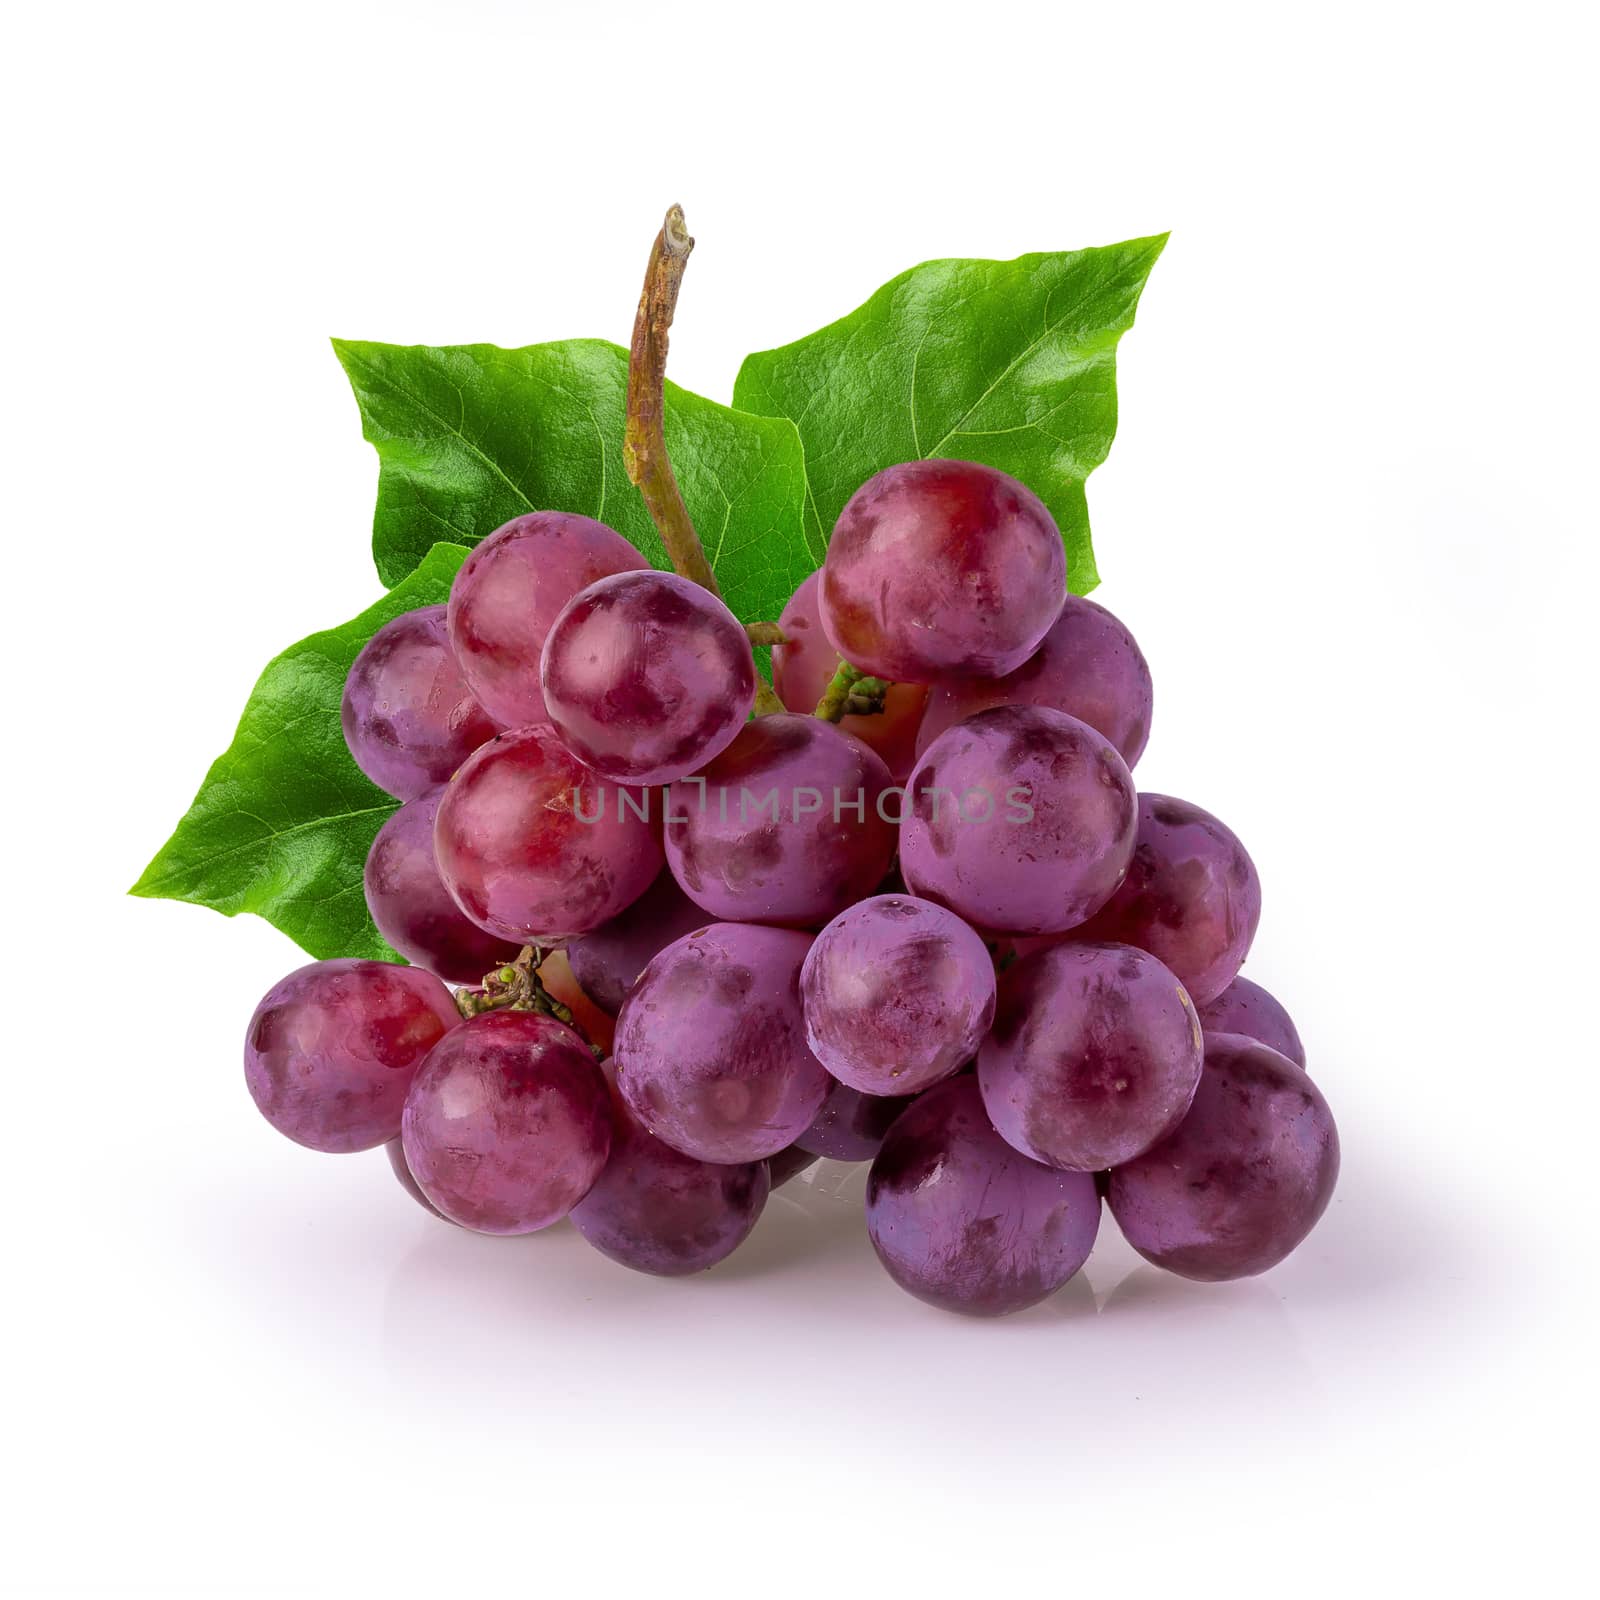 Red Grapes isolated over the white background.